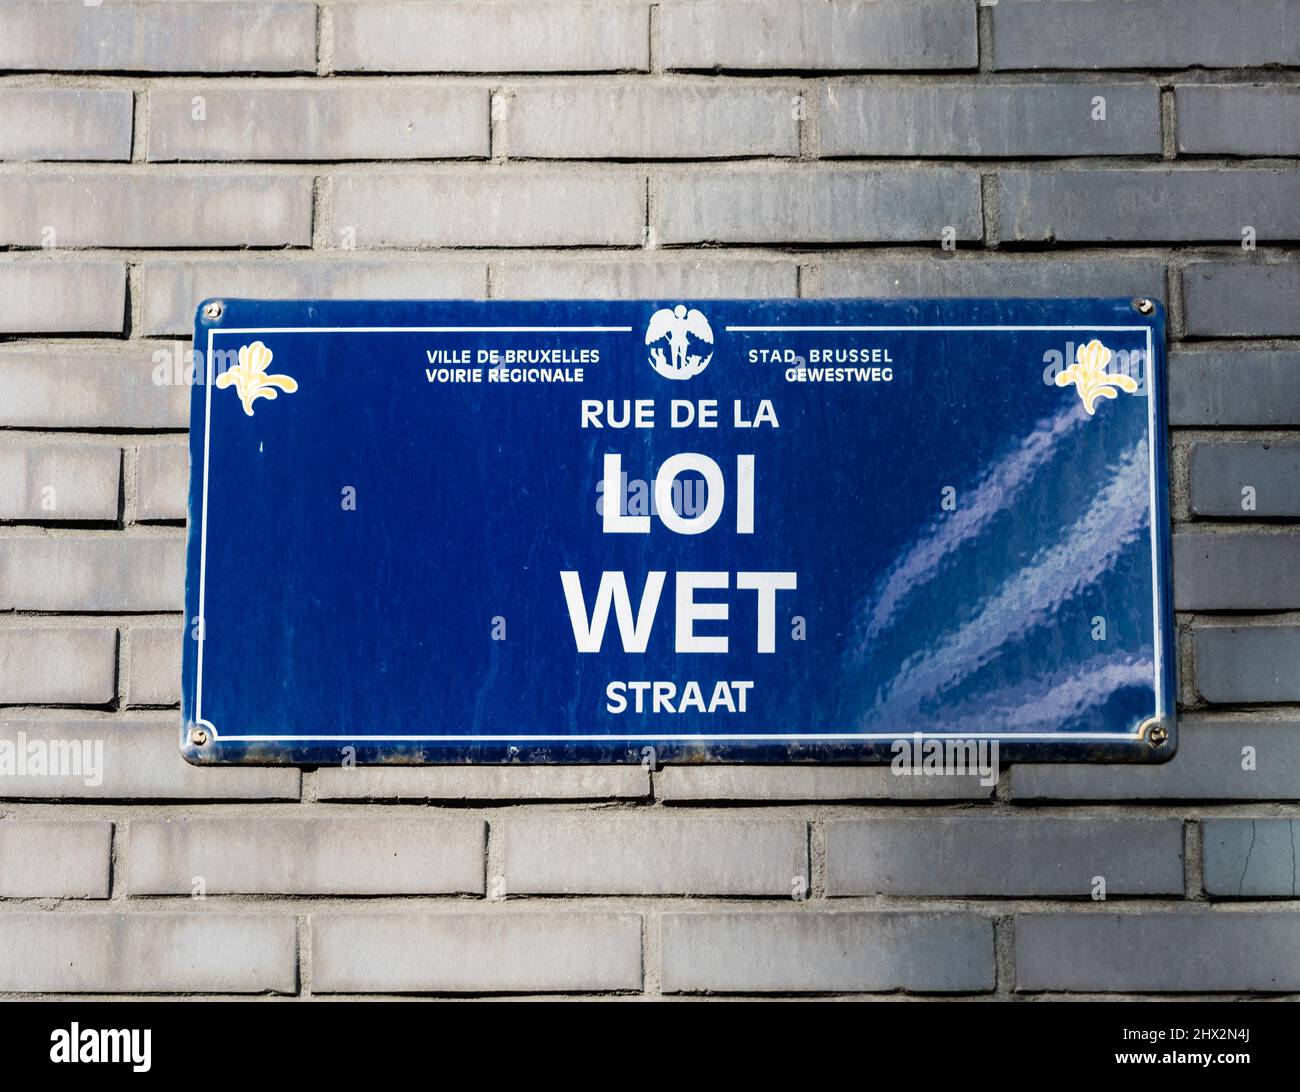 City of Brussels - Belgium -Streetname tag on a brick facade of the Rue de la Loi - Wetstraat- Law street in the European and business quarter. Stock Photo